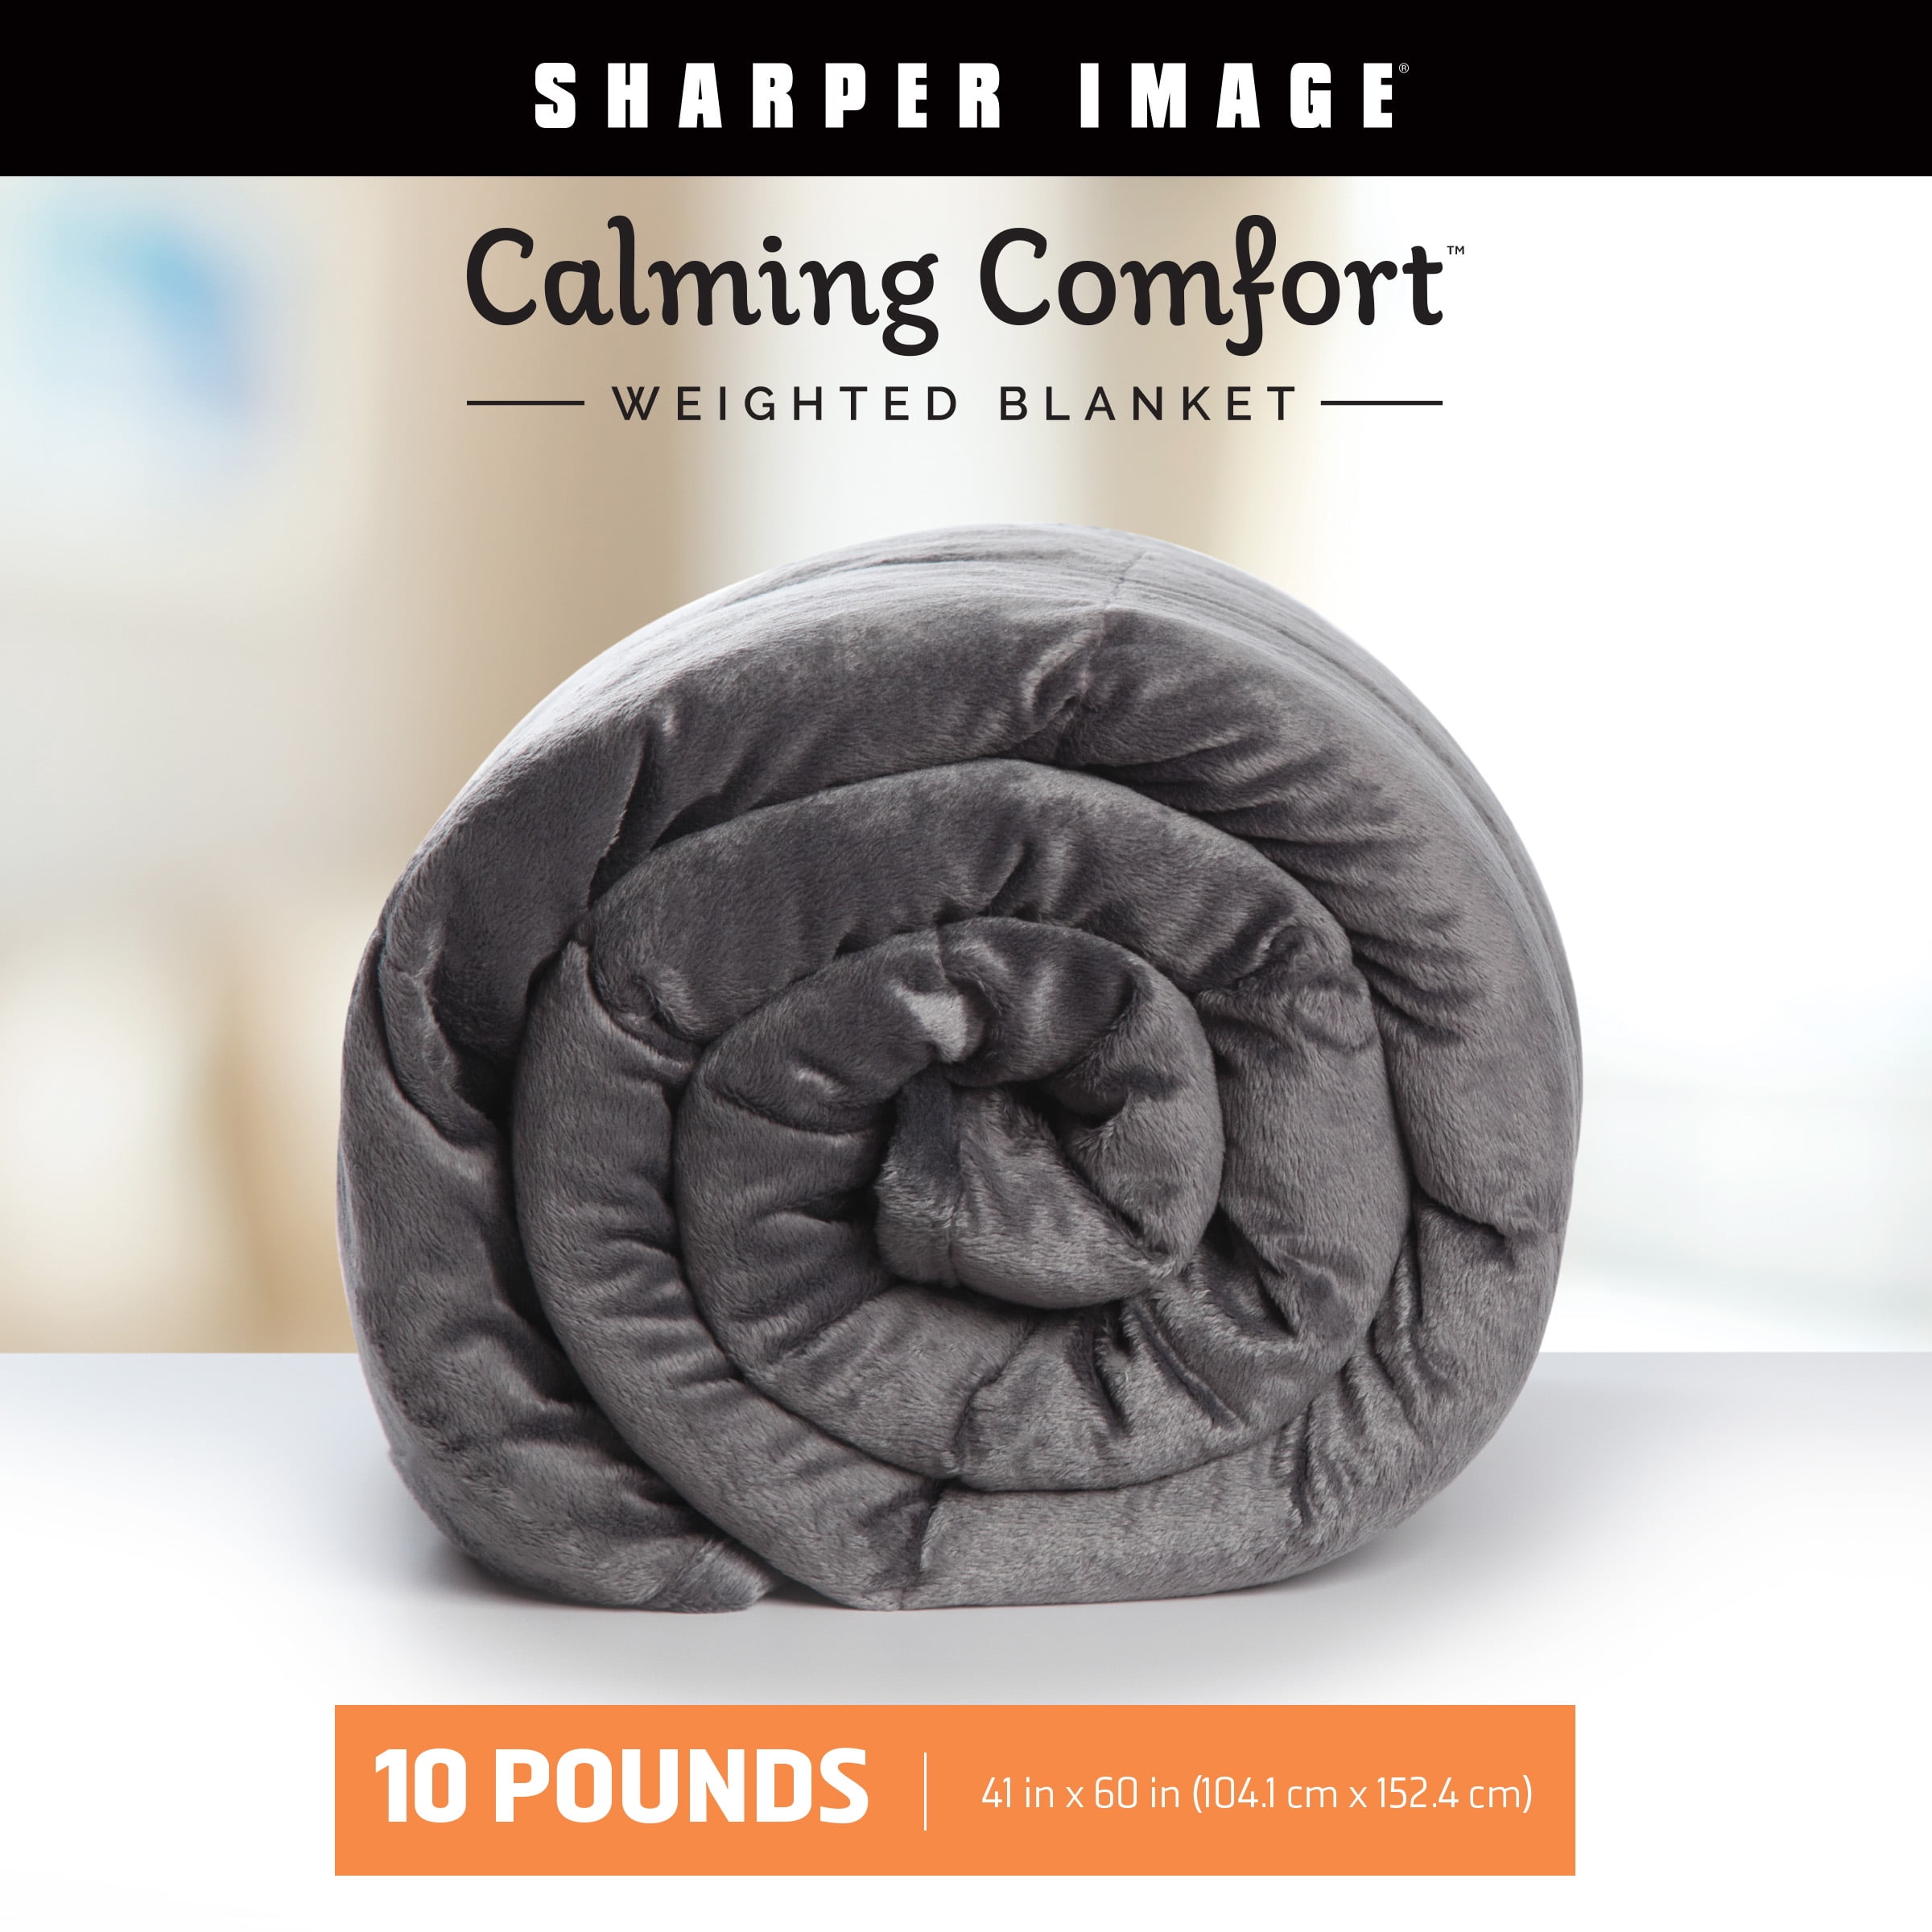 Calming Comfort Weighted Blanket by The Sharper Image, 10 lbs, As Seen